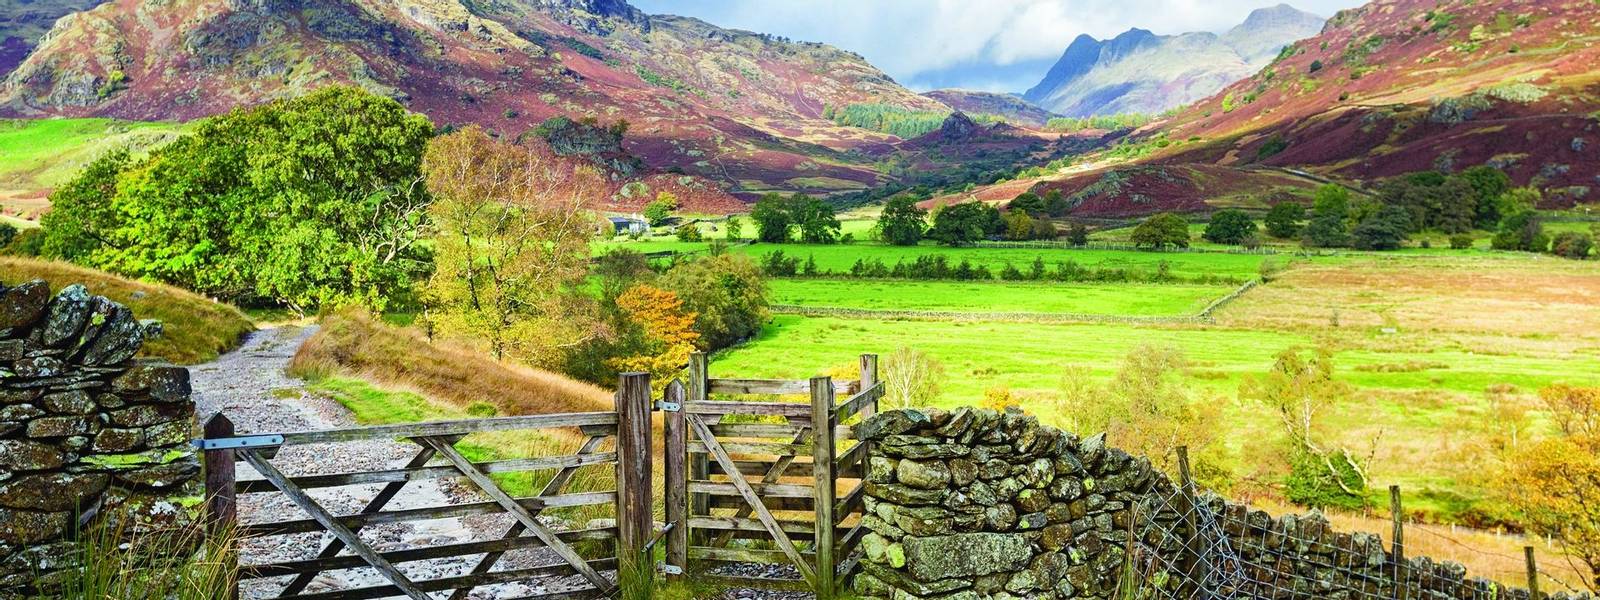 Gateway onto Little Langdale and The Pikes